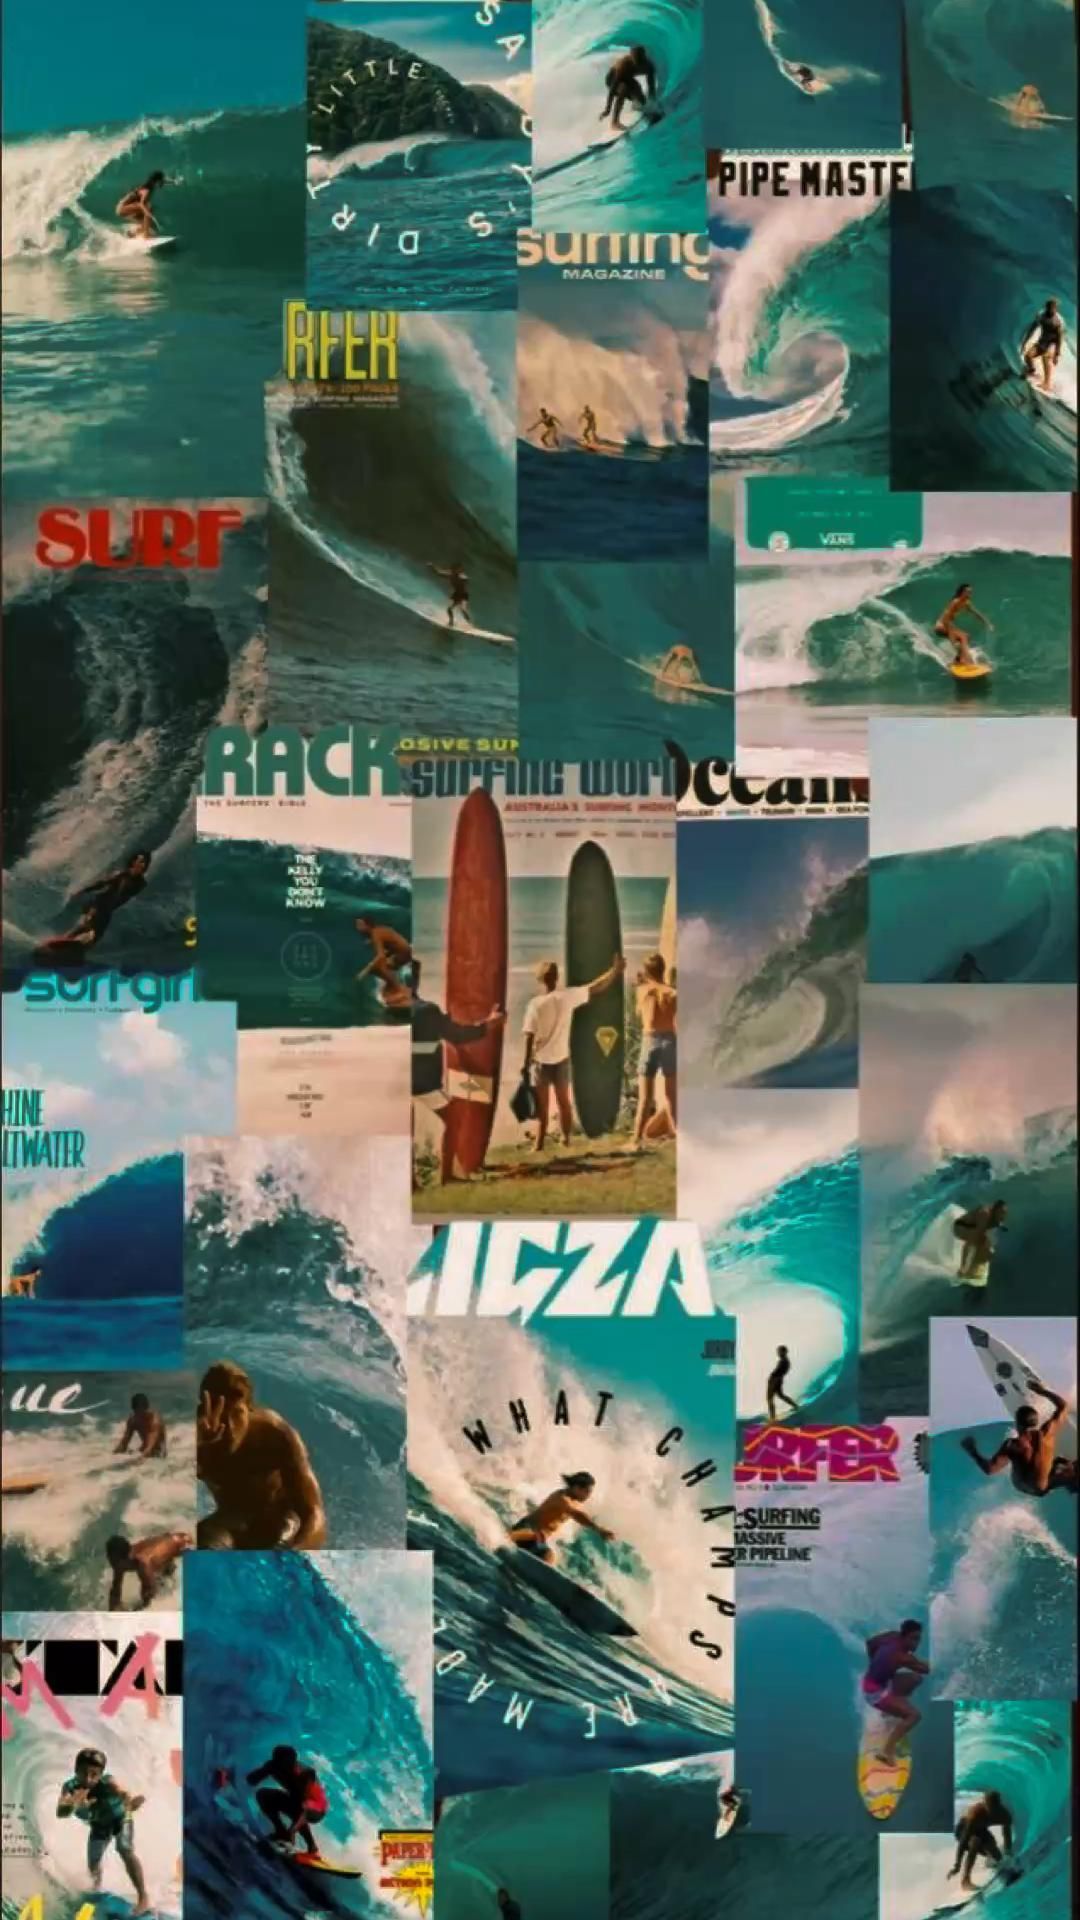 surf and beach aesthetic wallpaper. Surfing wallpaper, Surf poster, Surfing